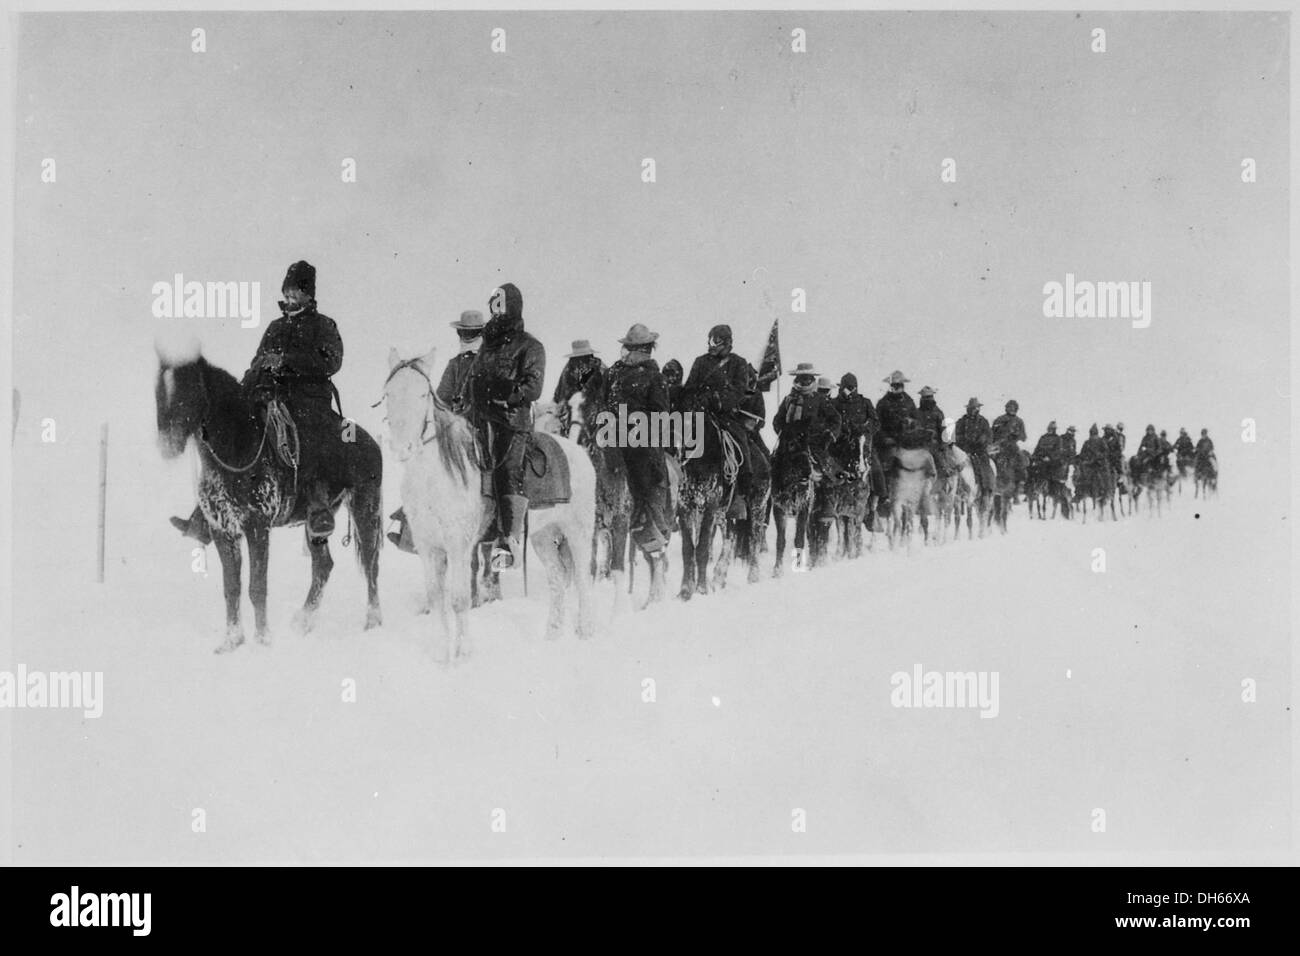 Return of Casey's scouts from the fight at Wounded Knee, 1890-91. Soldiers on horseback plod through the snow 531103 Stock Photo